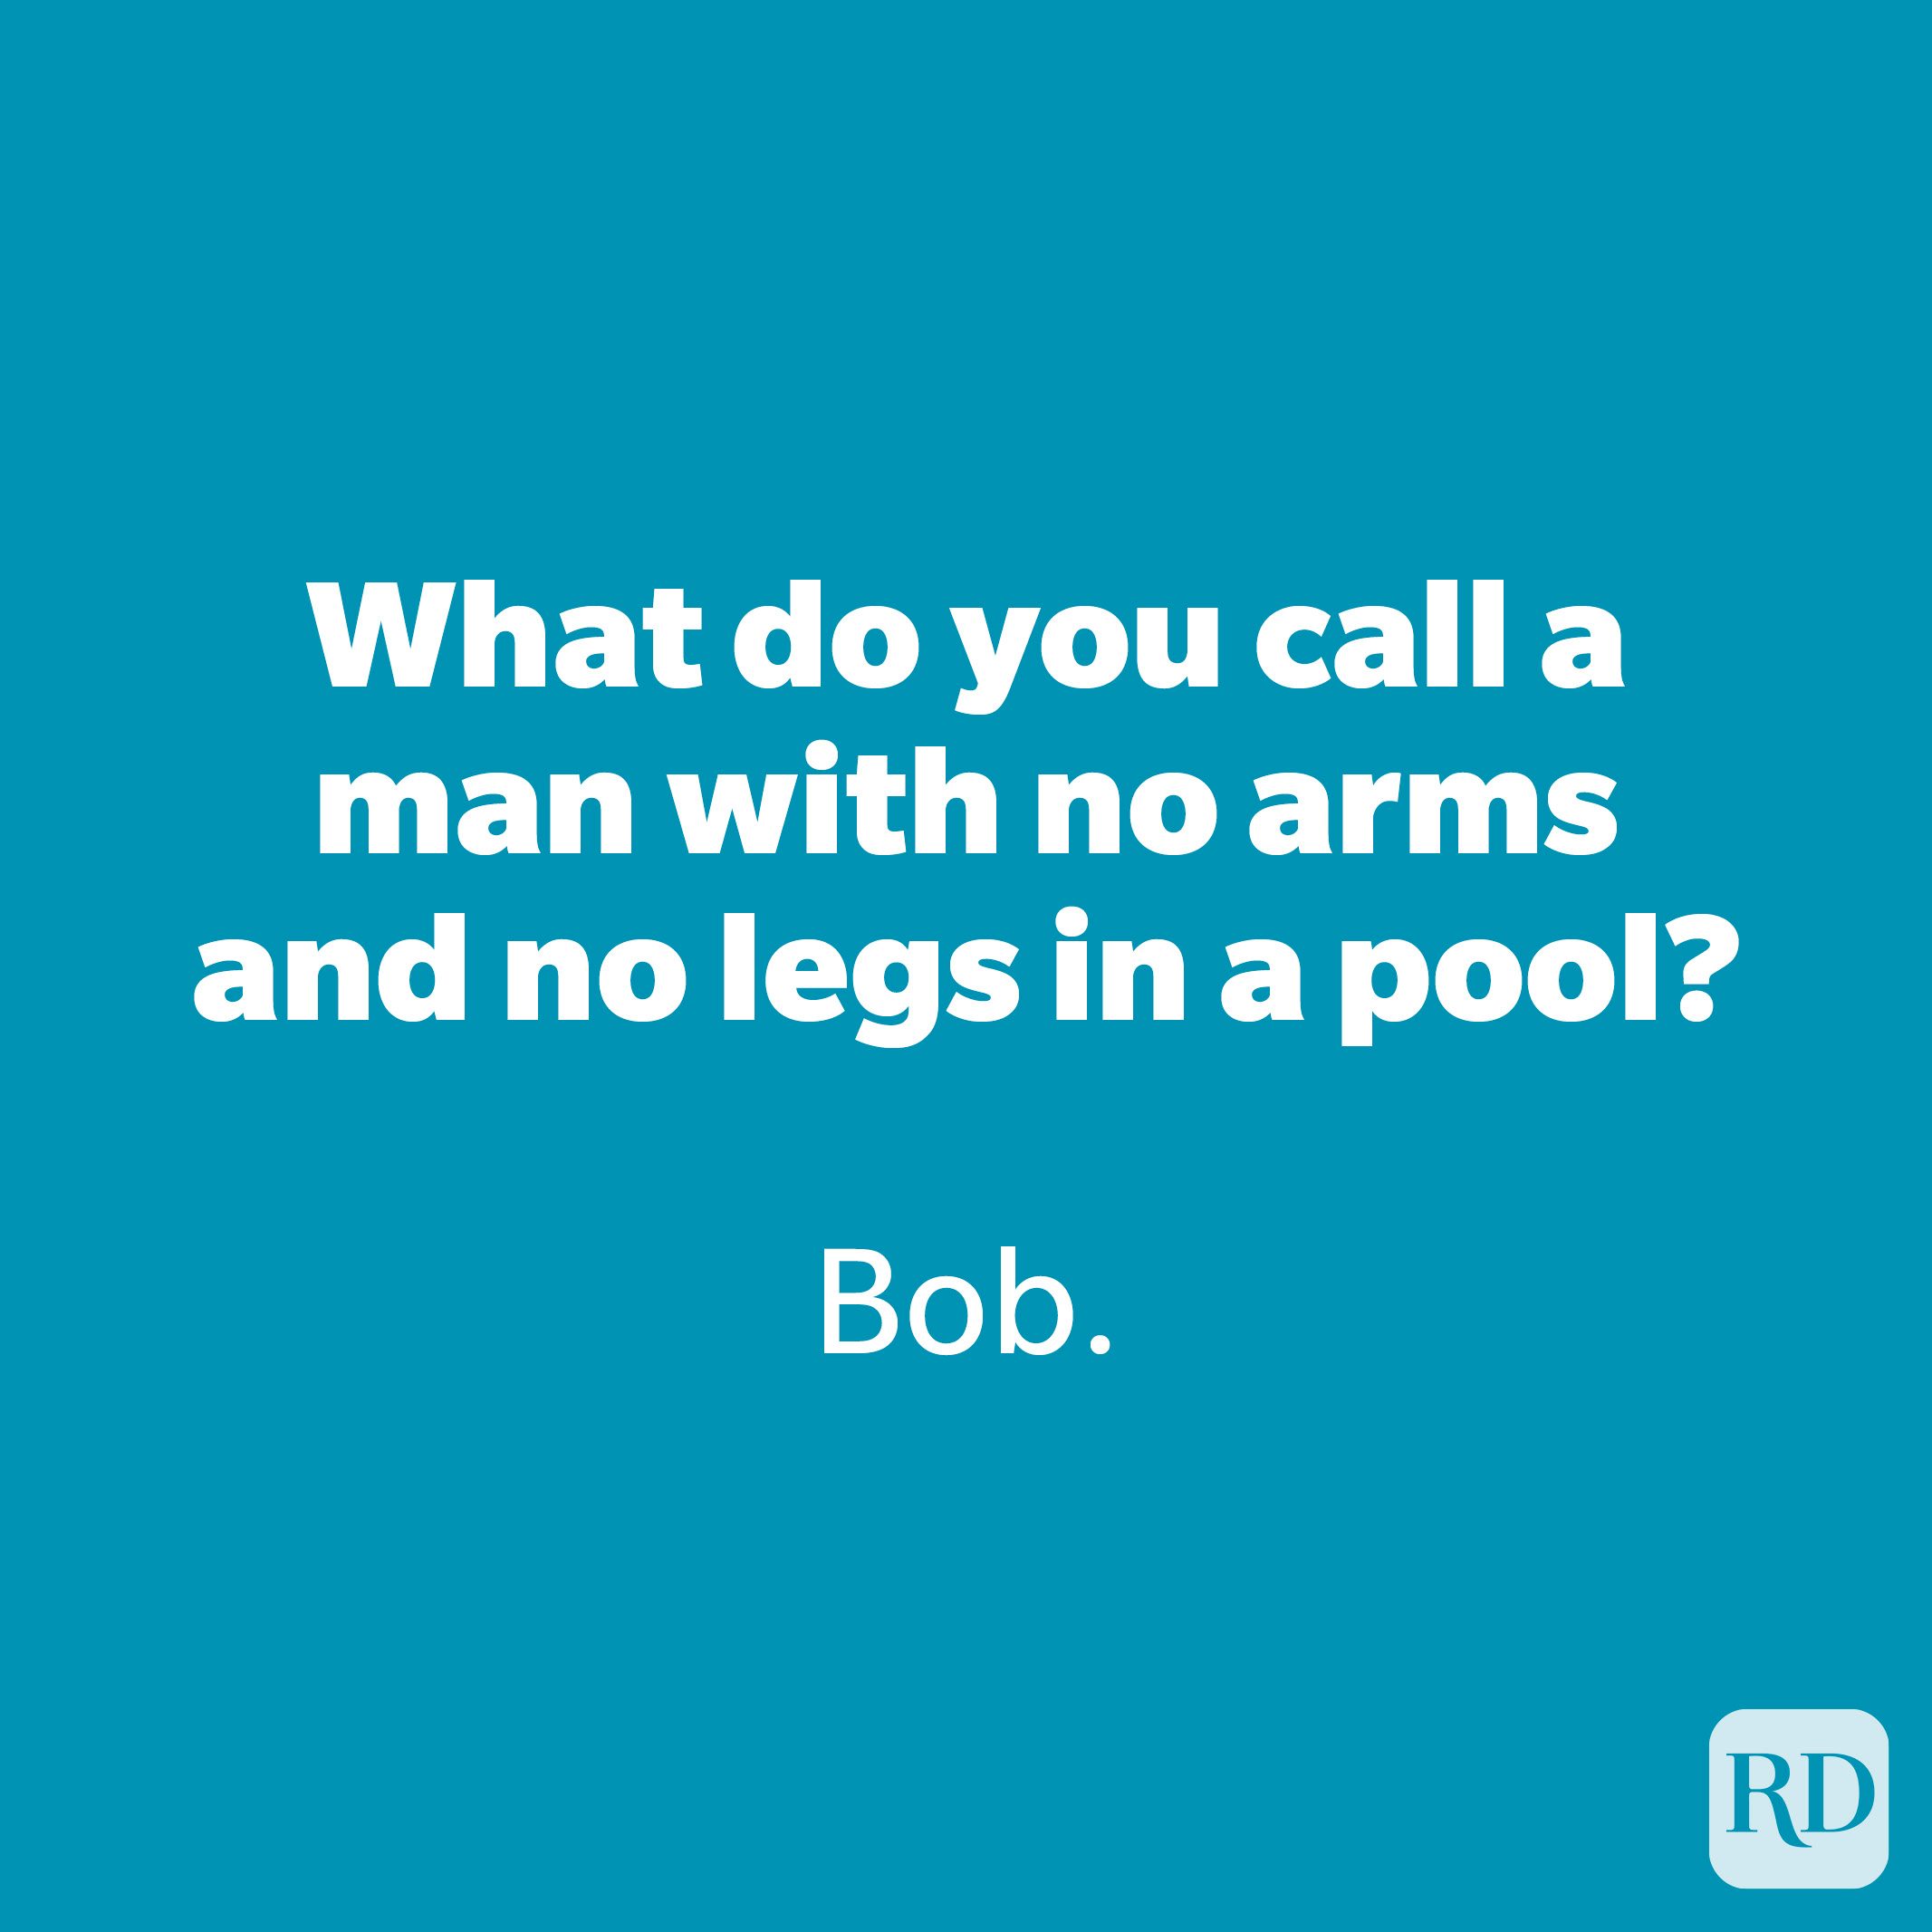 What do you call a man with no arms and no legs in a pool?